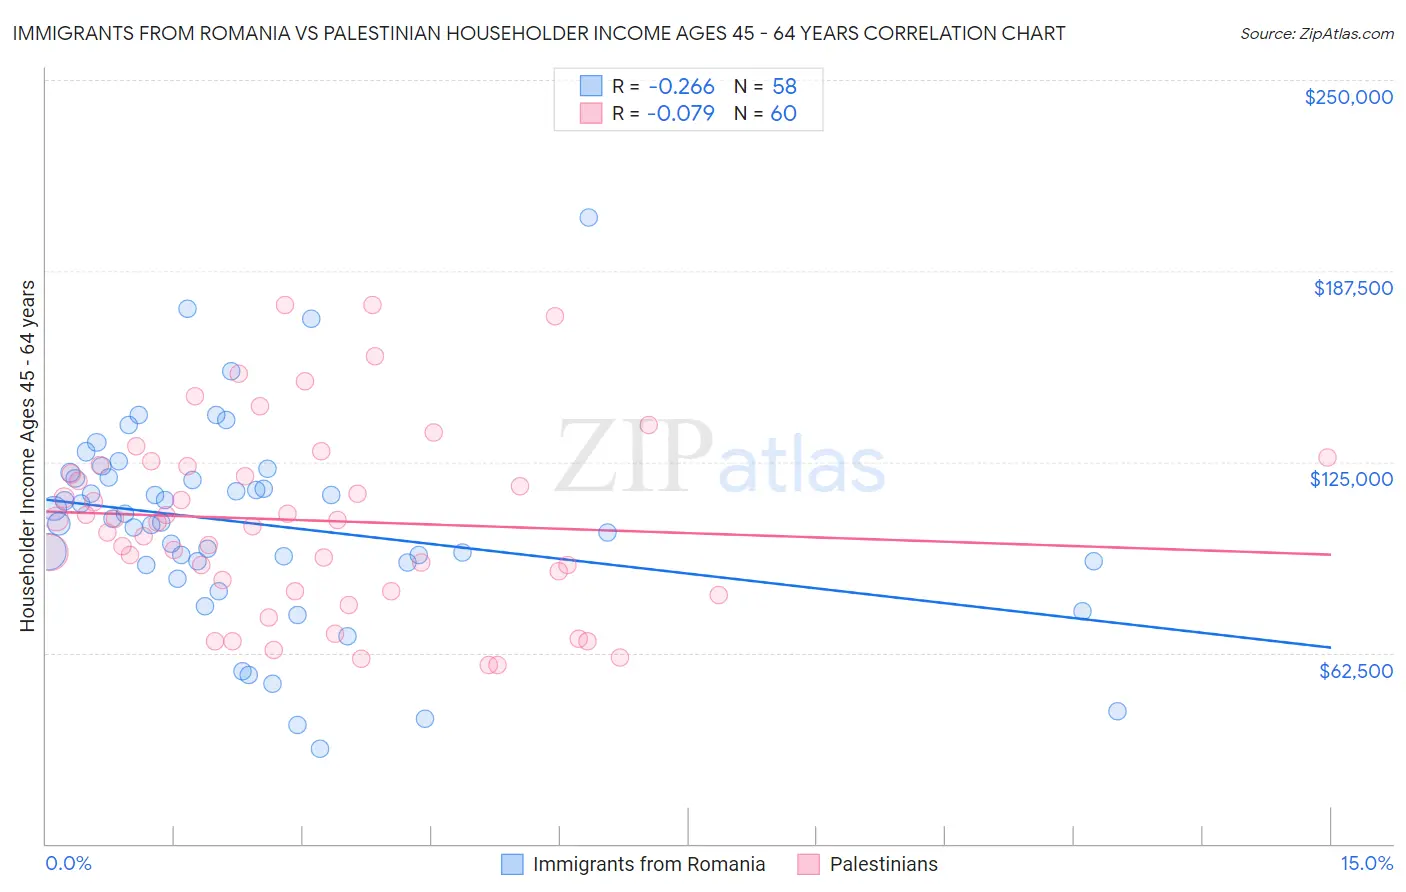 Immigrants from Romania vs Palestinian Householder Income Ages 45 - 64 years